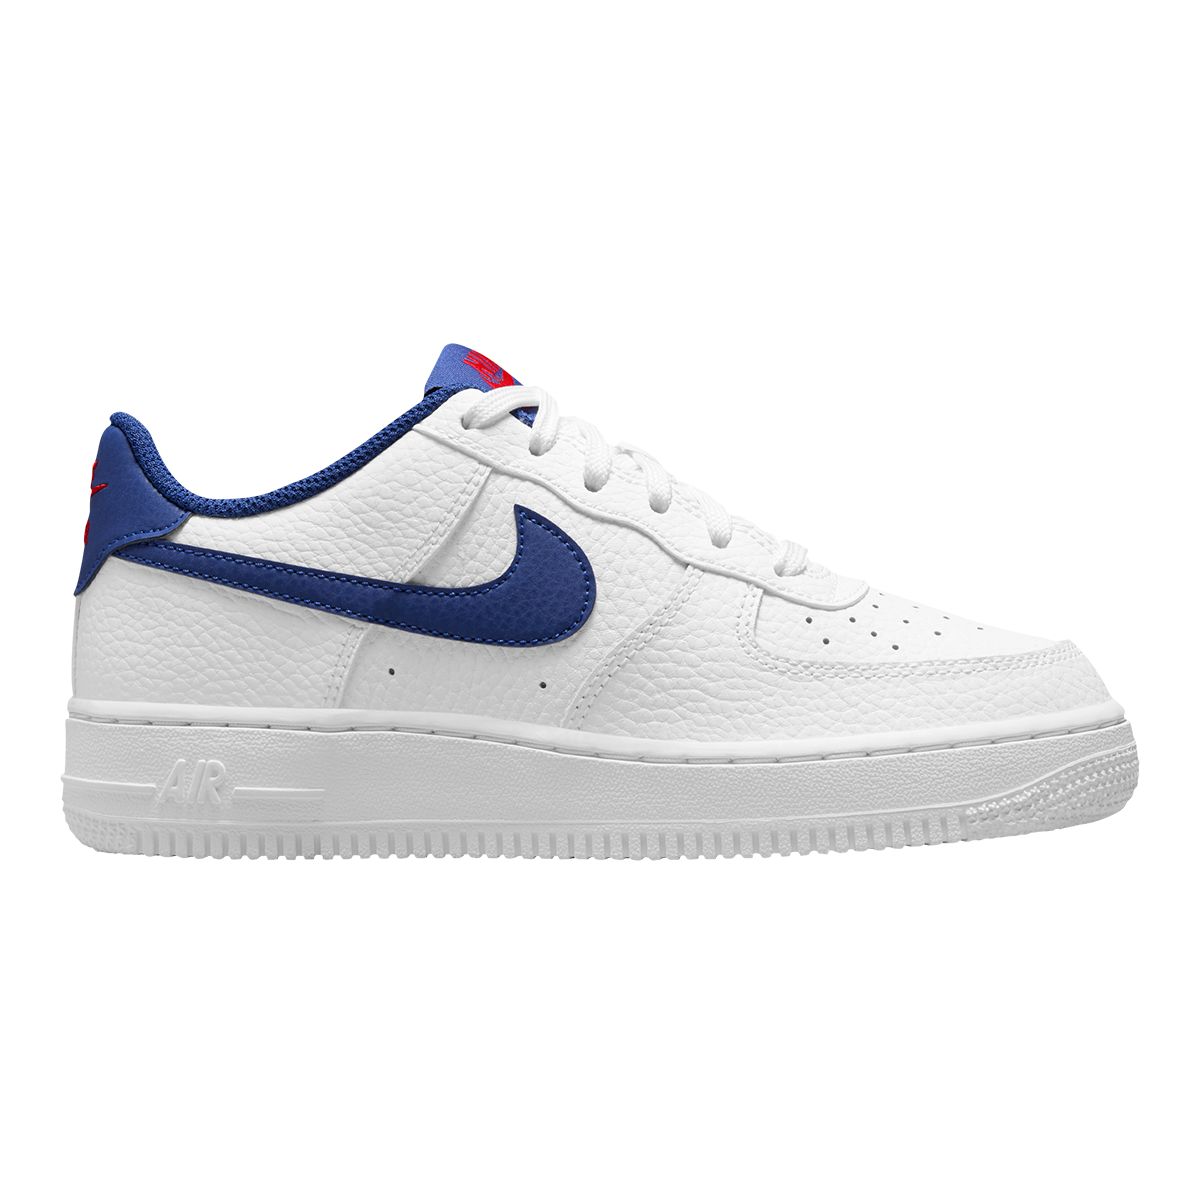 Nike Air Force 1 LV8 3 (GS) Big Kids Basketball Shoes Size 5.5